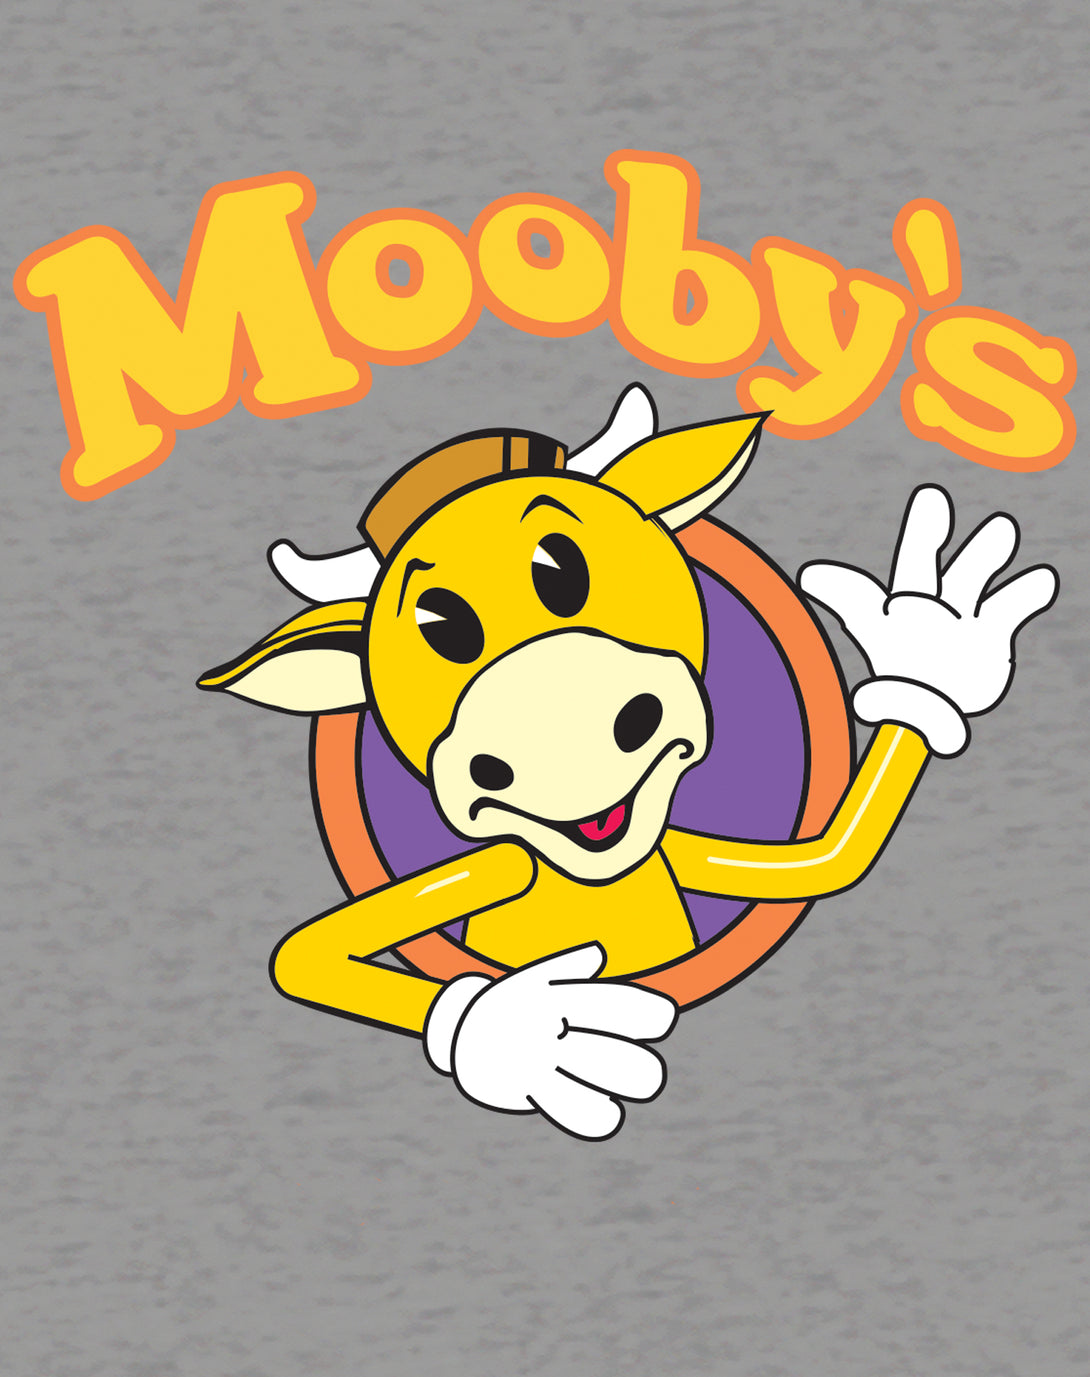 Kevin Smith View Askewniverse Mooby's Logo Official Sweatshirt Sports Grey - Urban Species Design Close Up